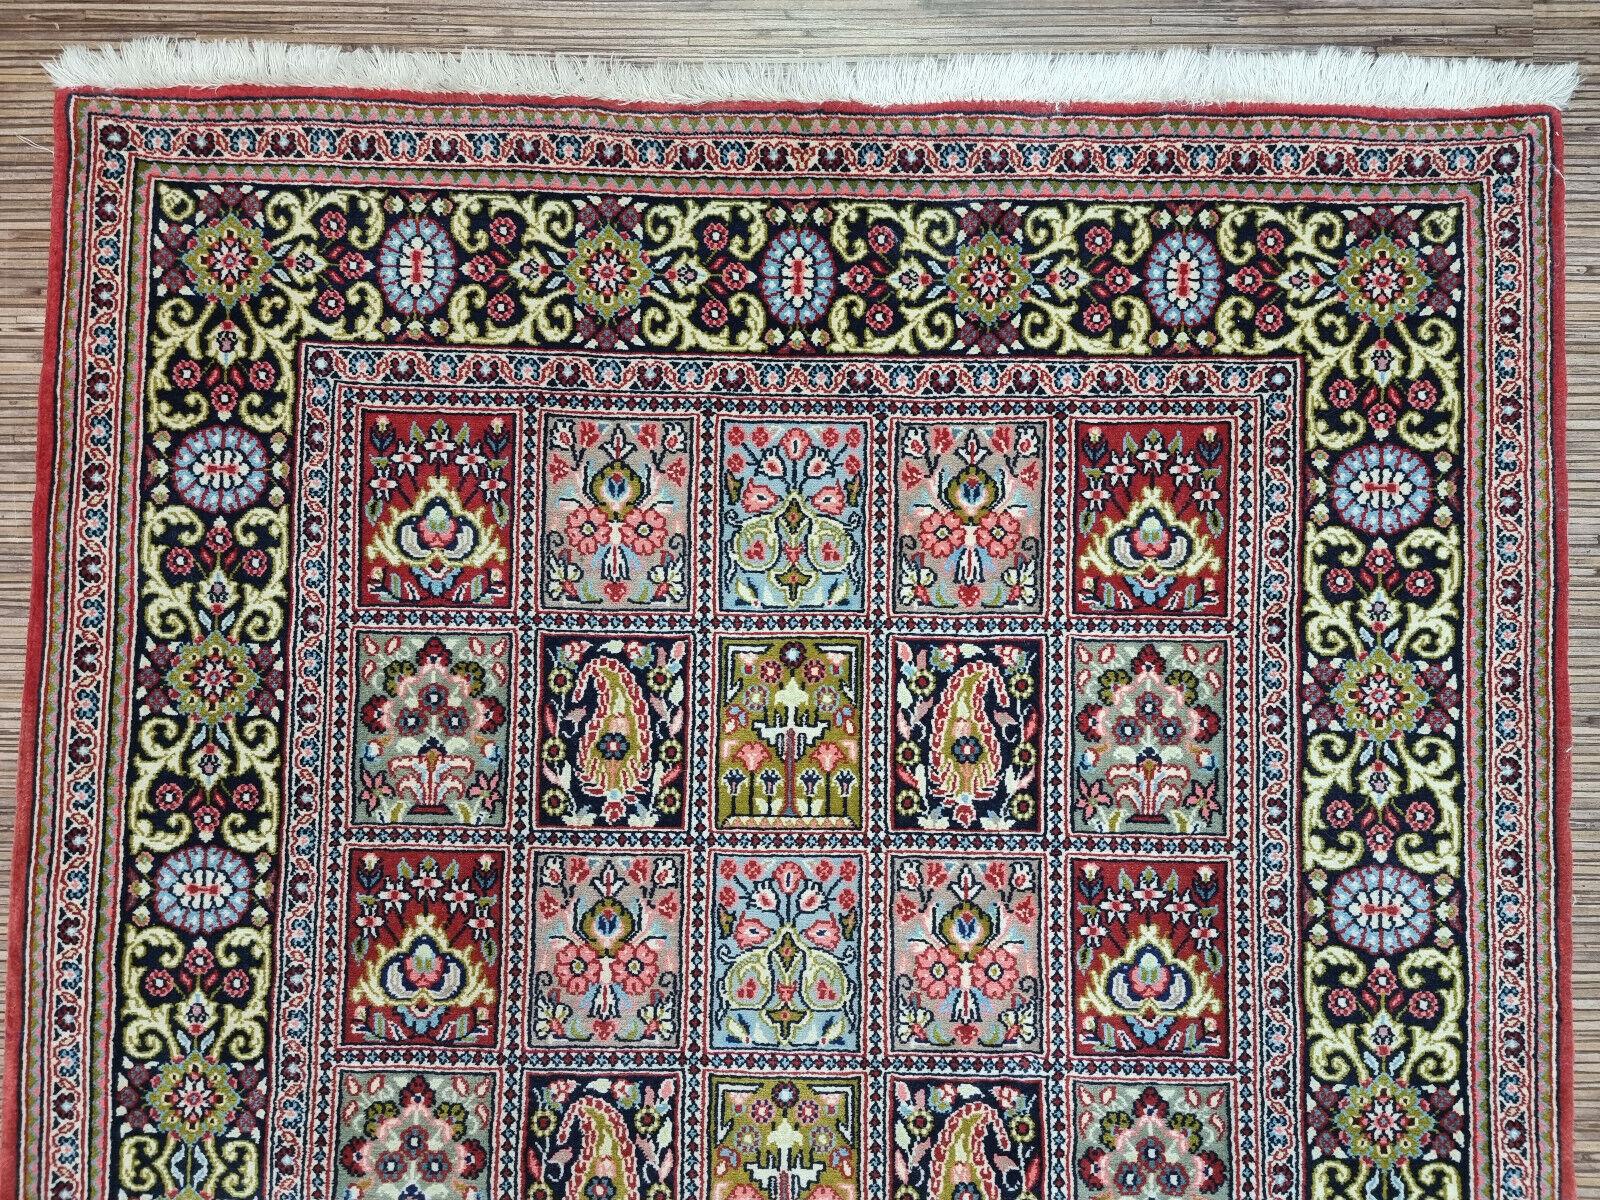 Late 20th Century Handmade Vintage Persian Style Qum Rug 3.6' x 5.1', 1970s - 1D87 For Sale